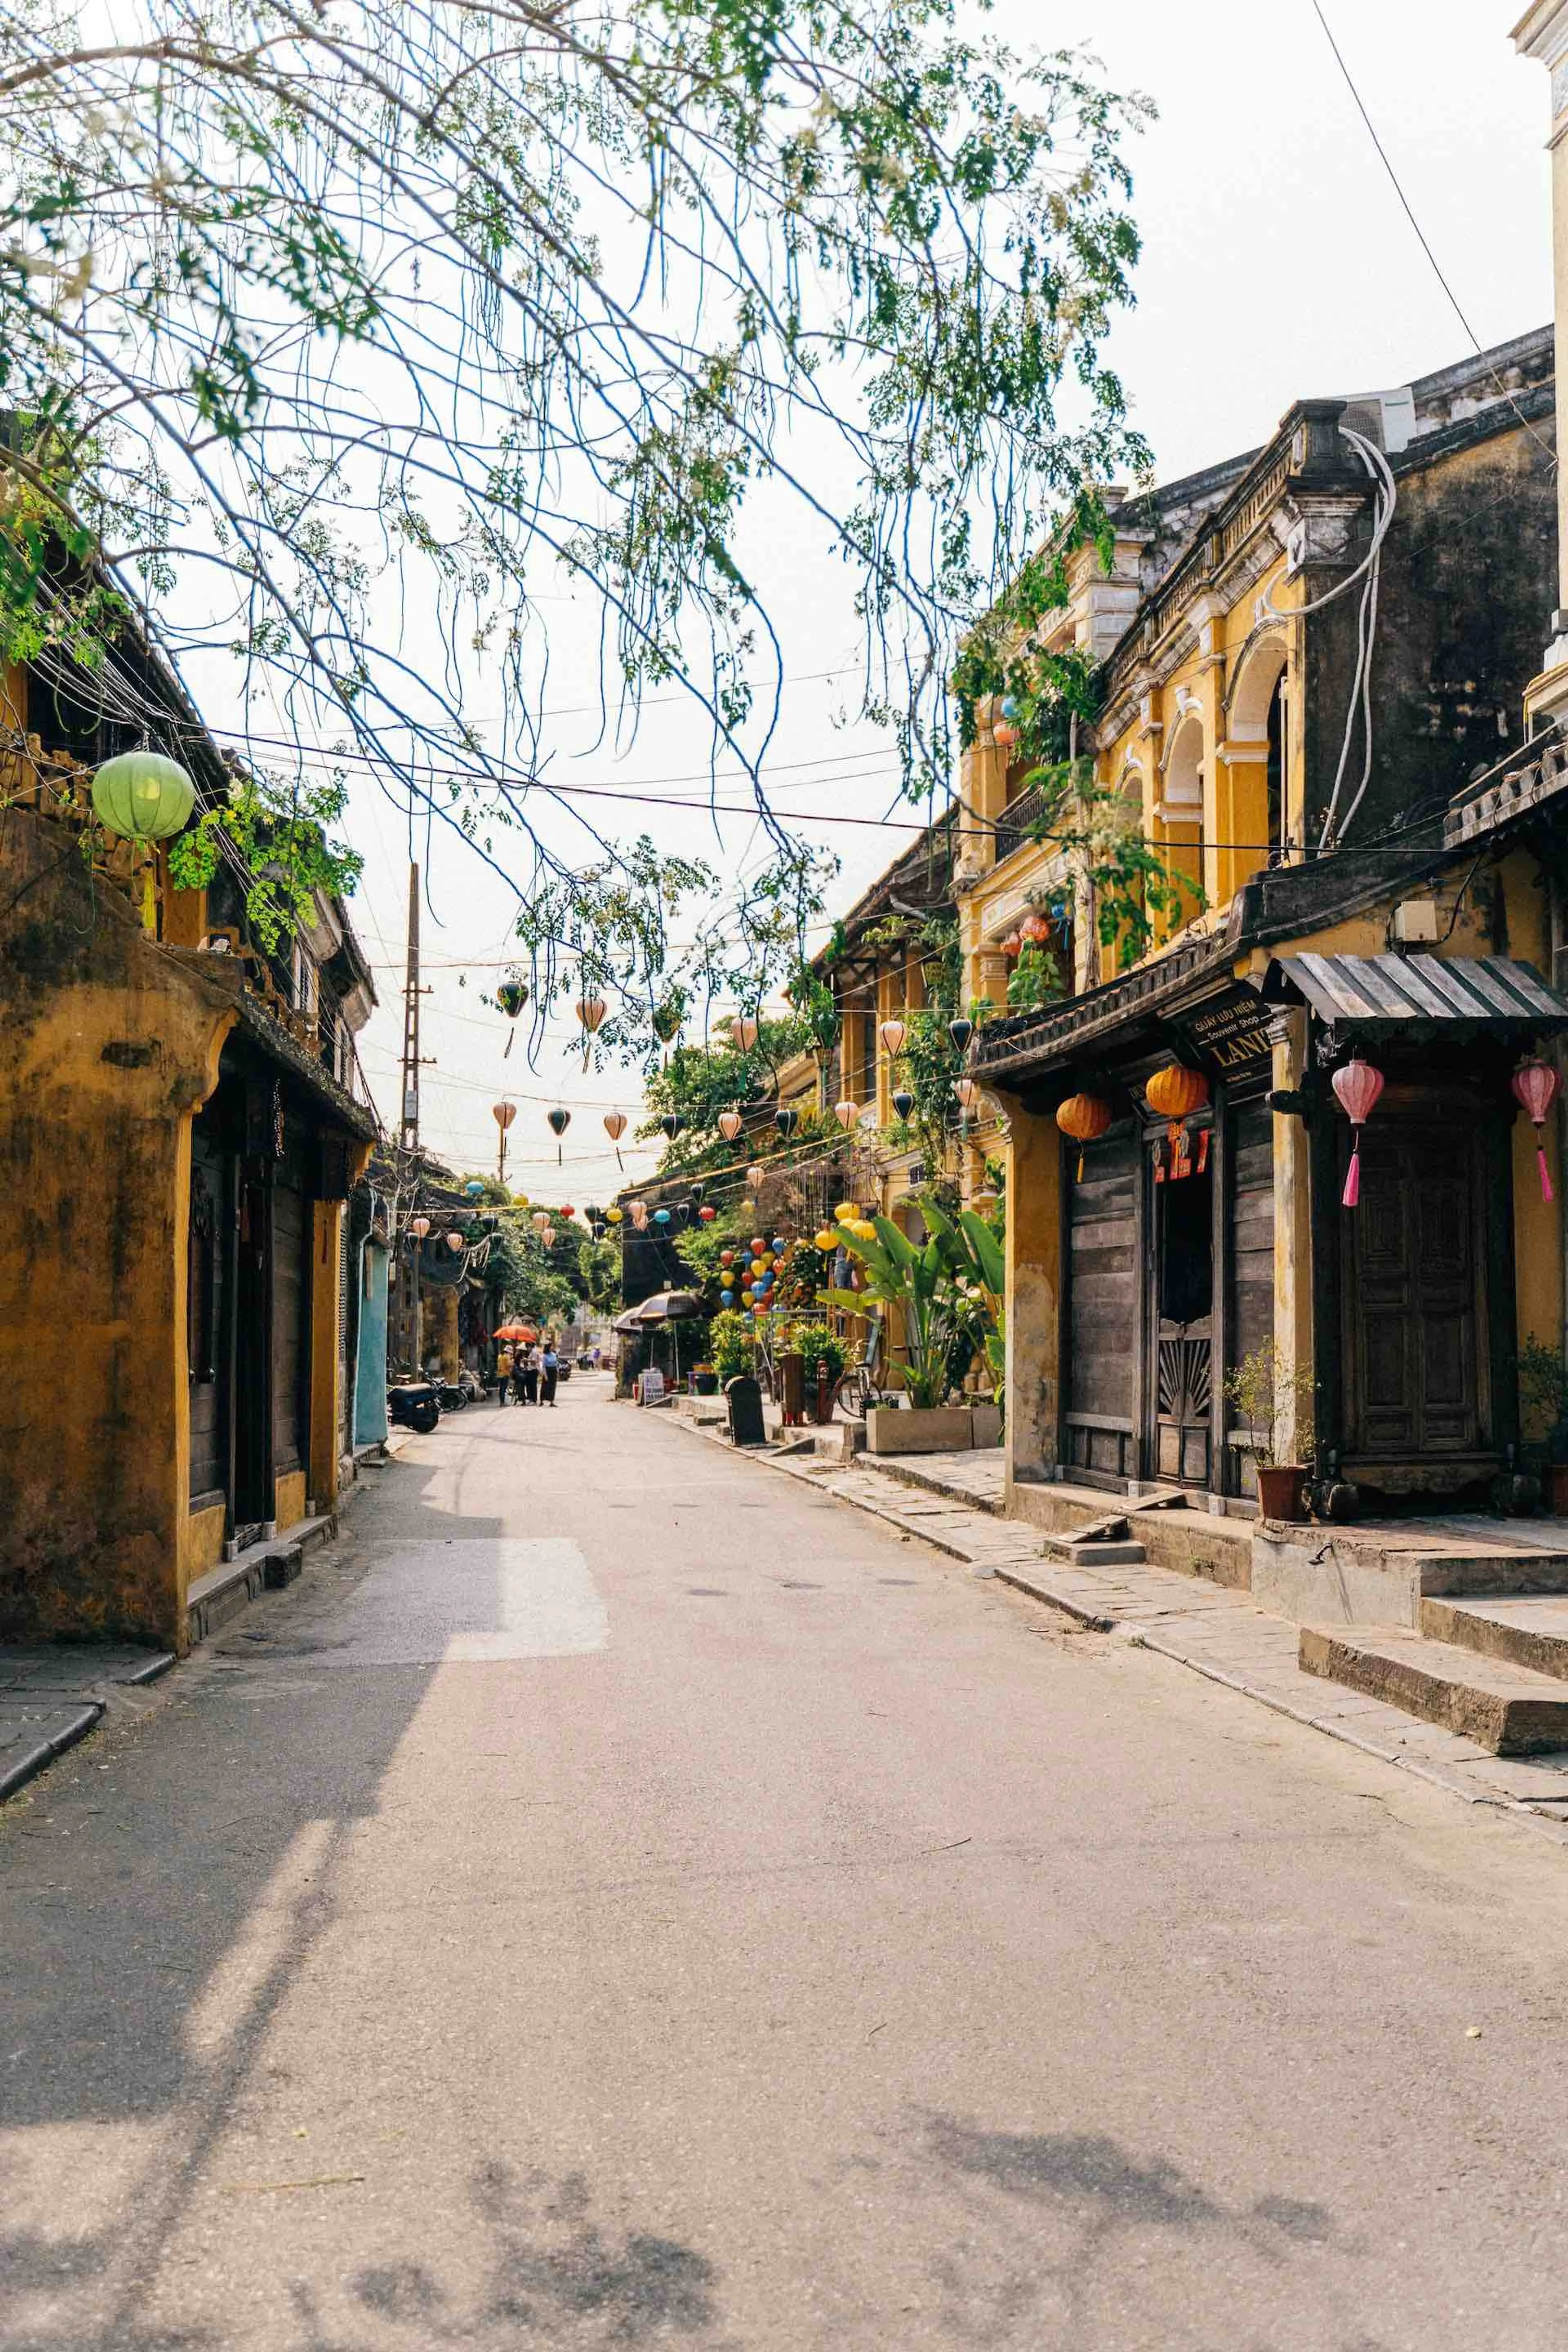 Hoi An Ancient Town - Mr Biker Saigon featured stop point in our bike trips